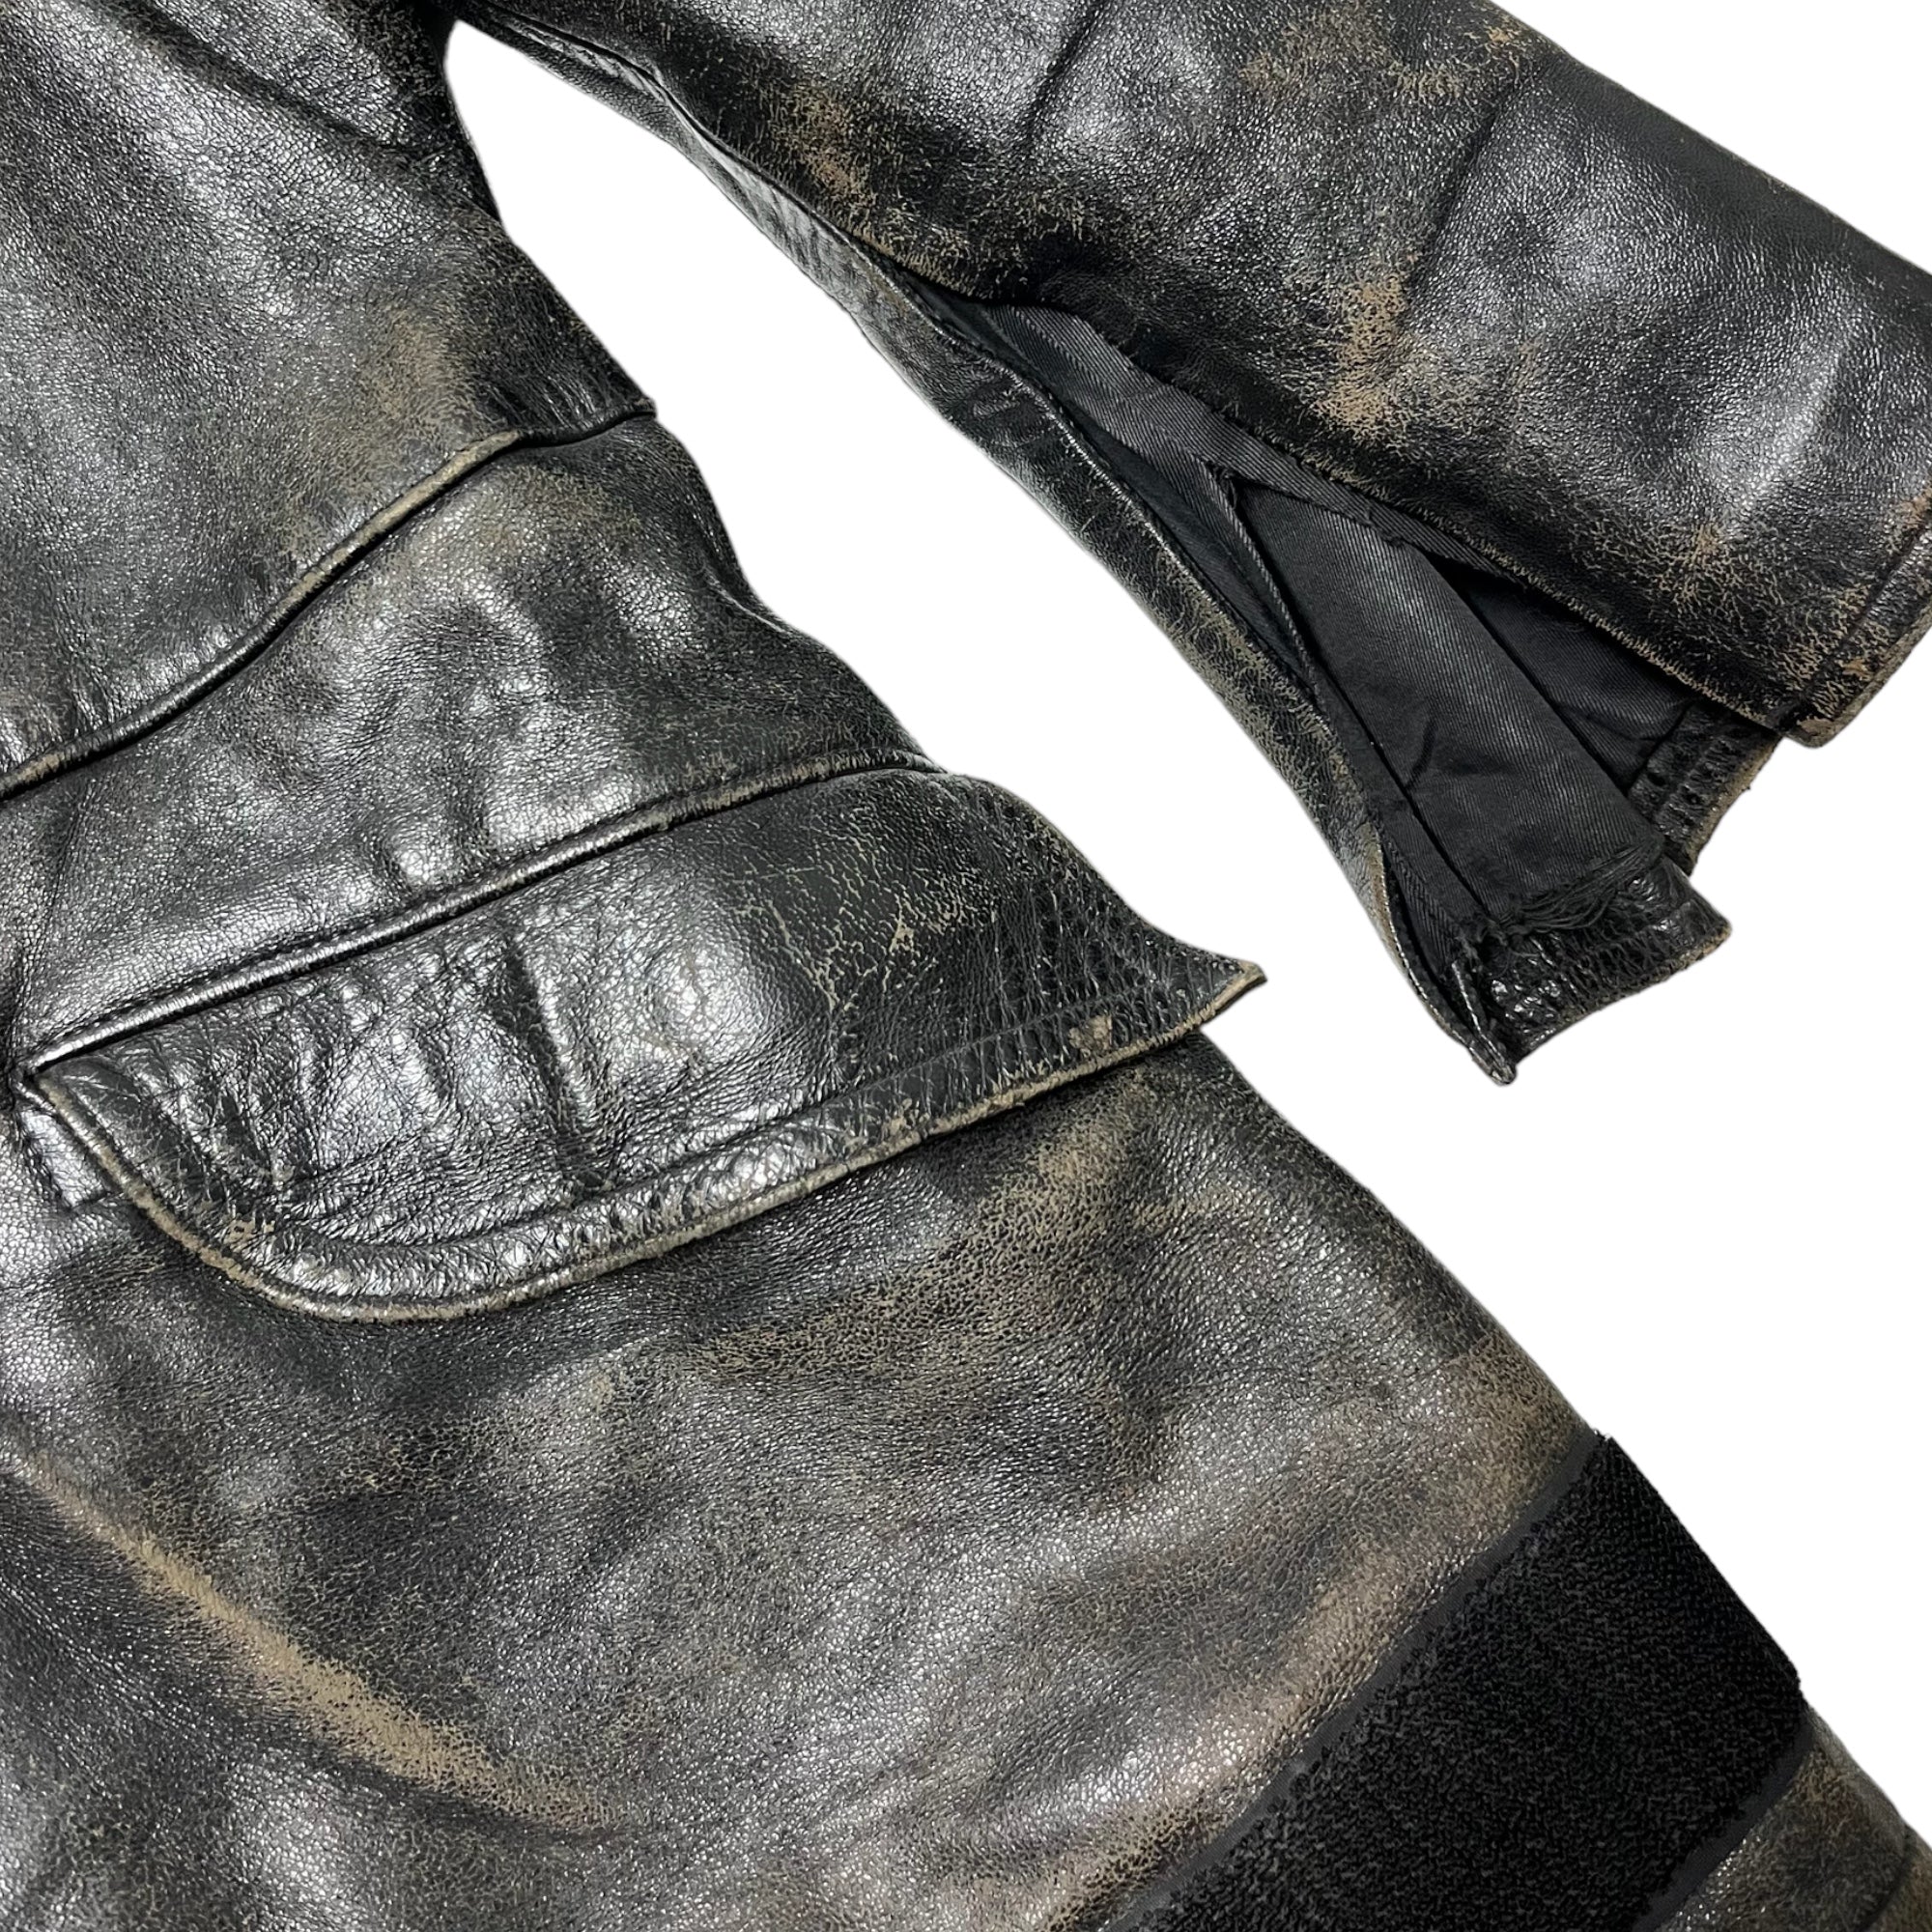 1960s French Leather Fireman Jacket With Velcro - Distressed Black - M